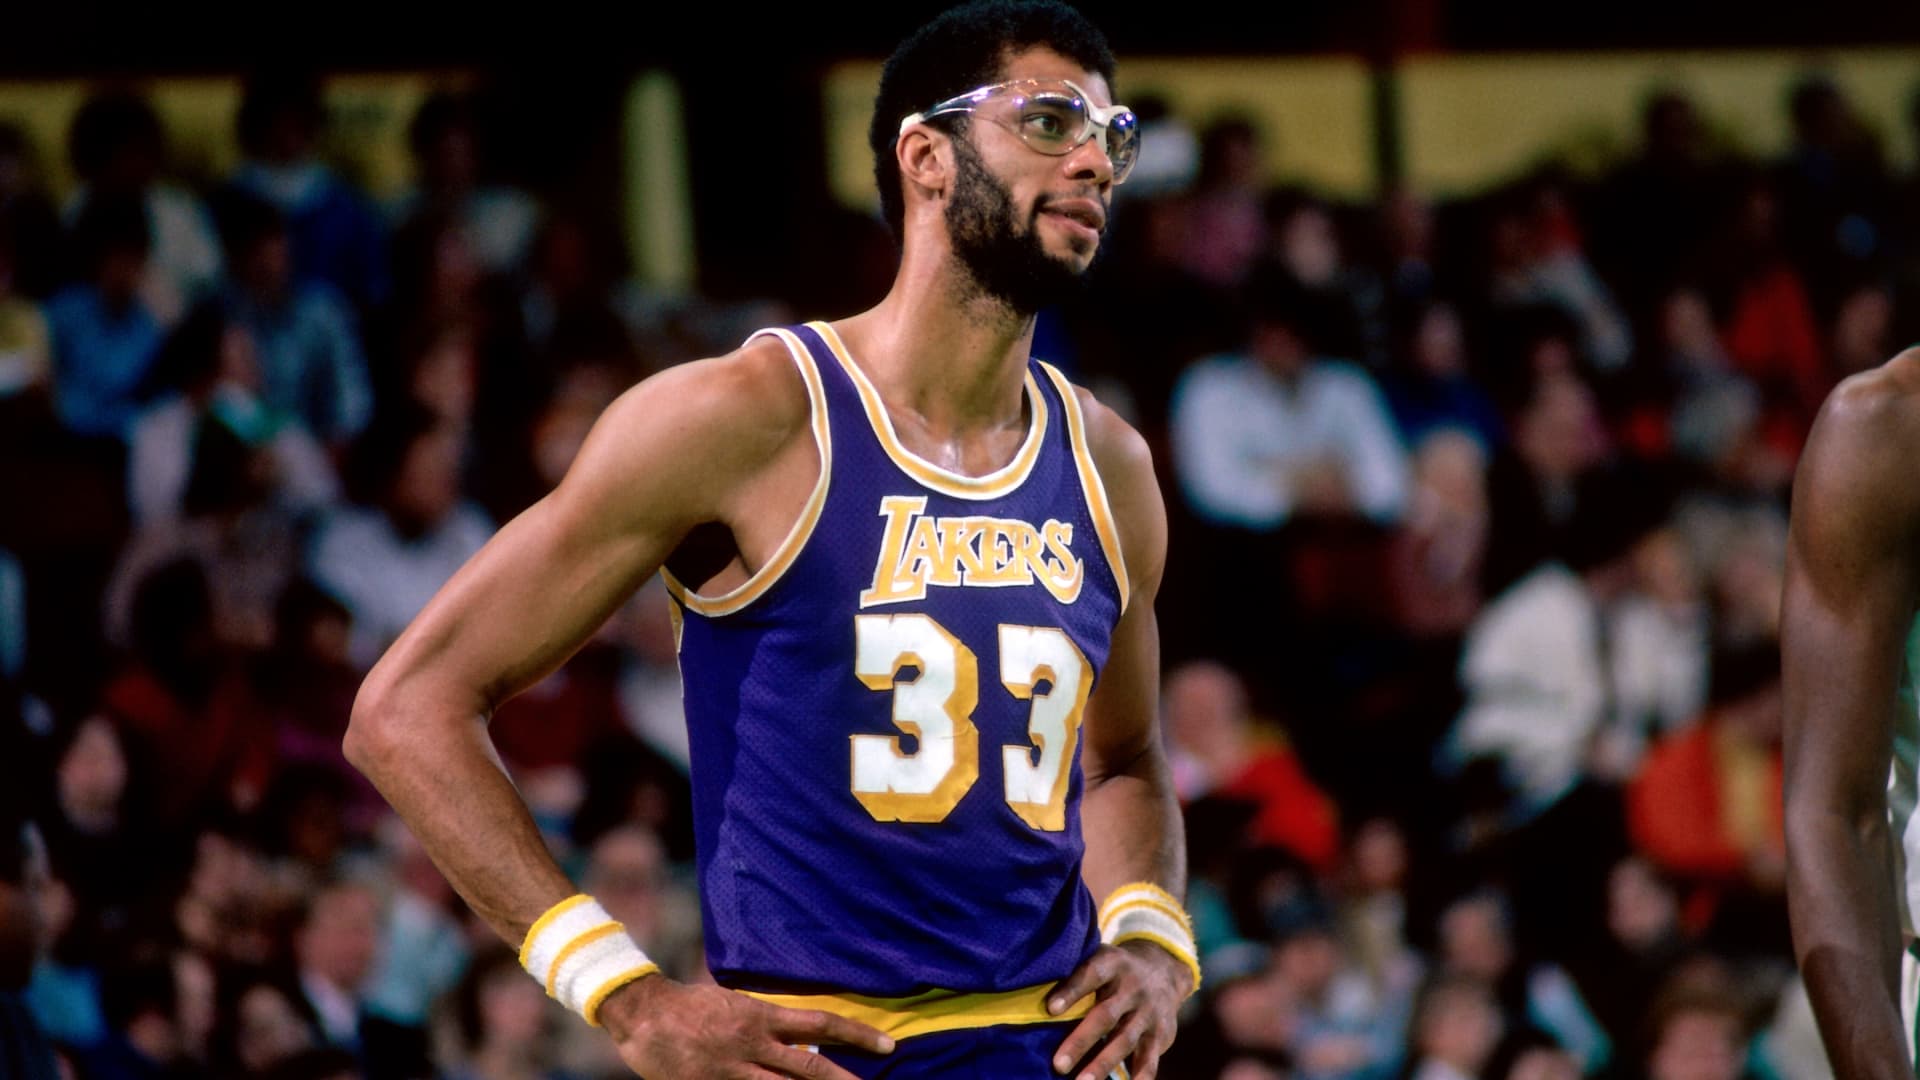 Kareem Abdul-Jabbar held the NBA all-time scoring record for 39 years before LeBron James broke it on Tuesday night.